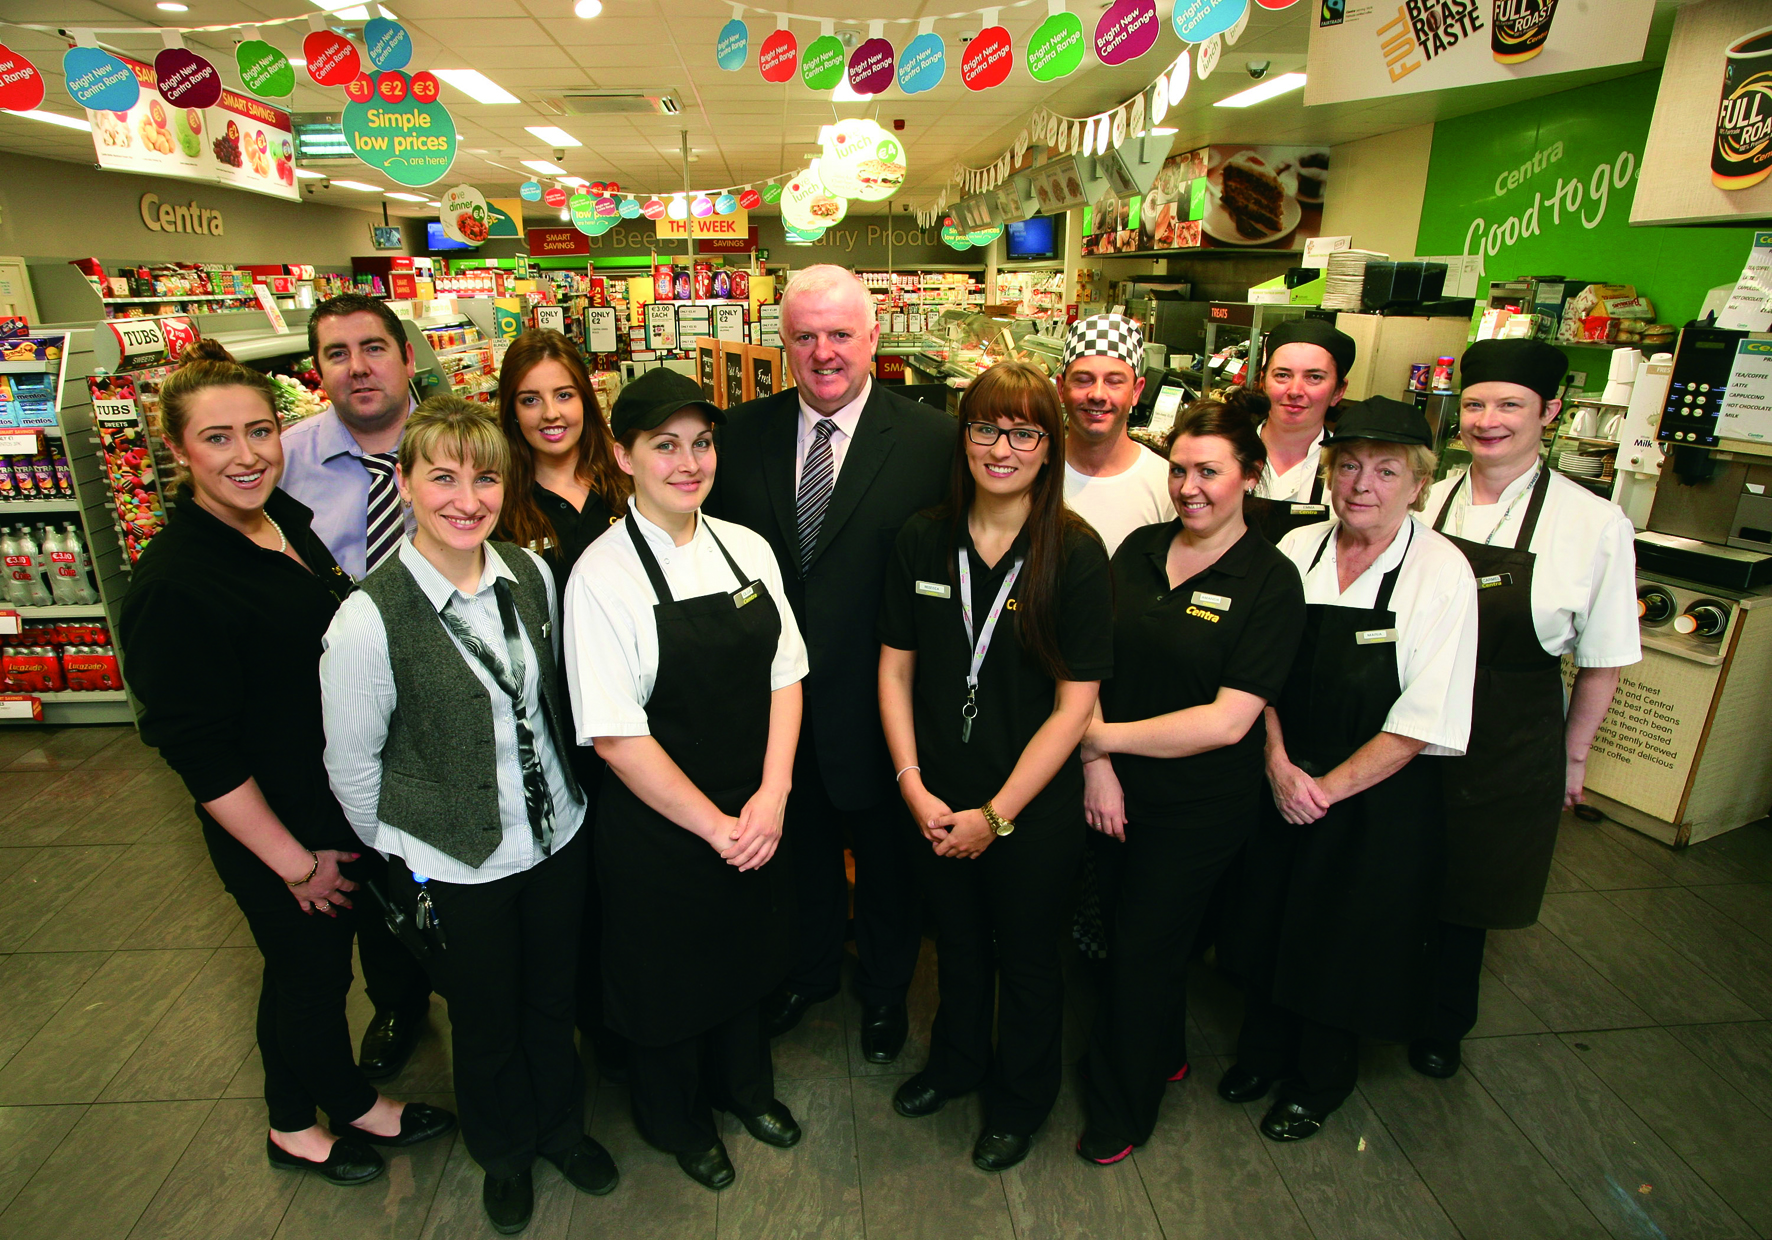 Owner of Centra Ratoath, Paul Sweeney, with his staff